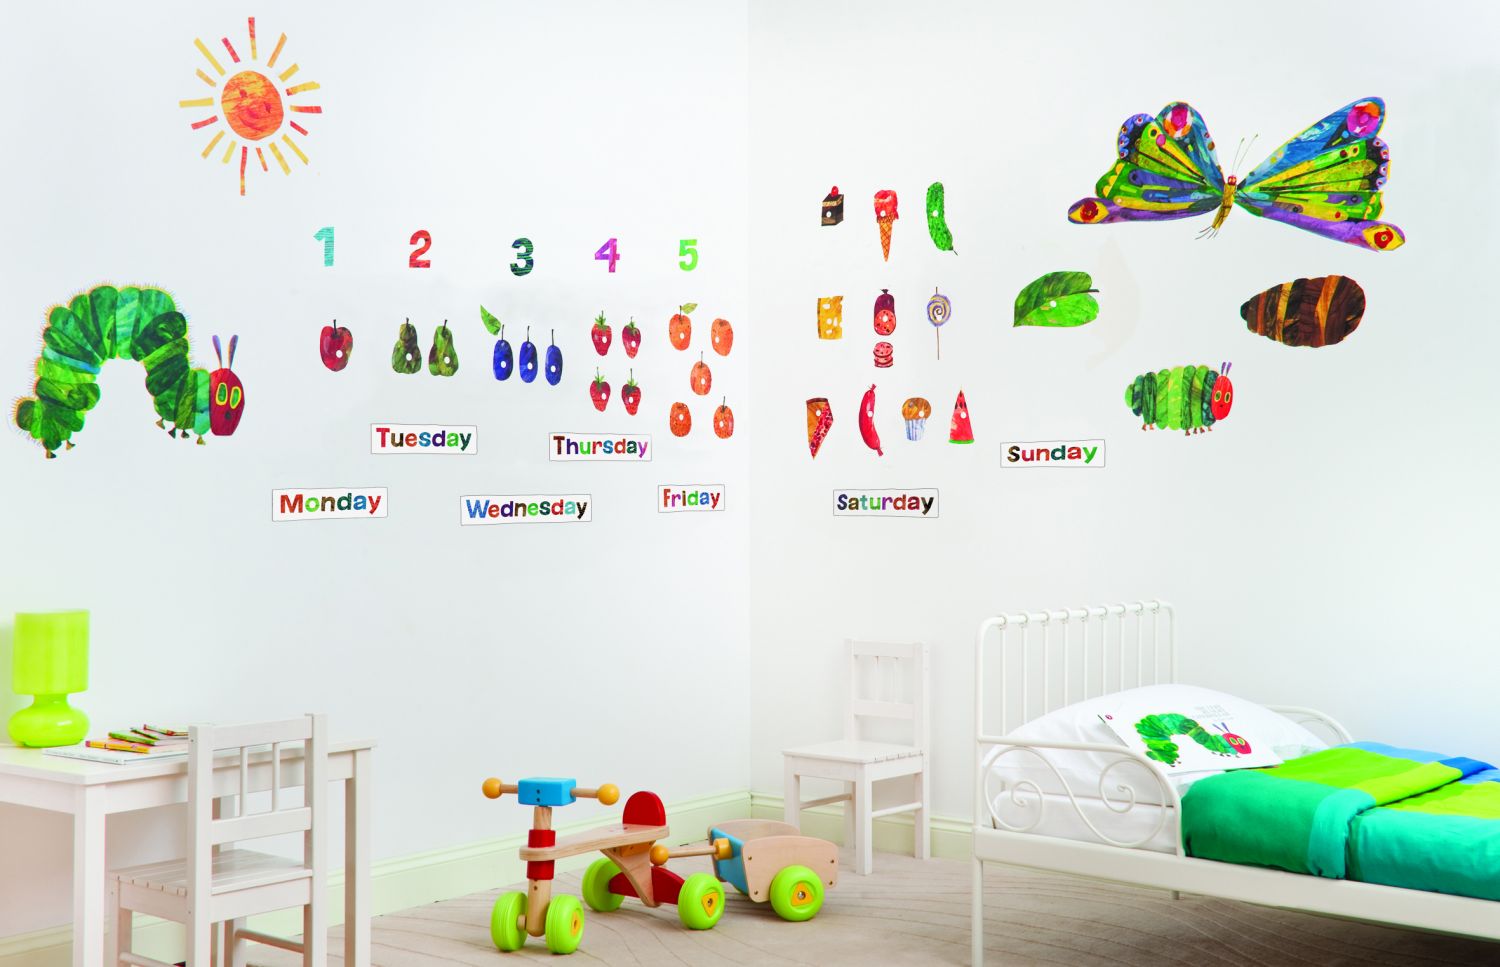 The Very Hungry Caterpillar by FunToSee Wallpaper Direct 1500x967